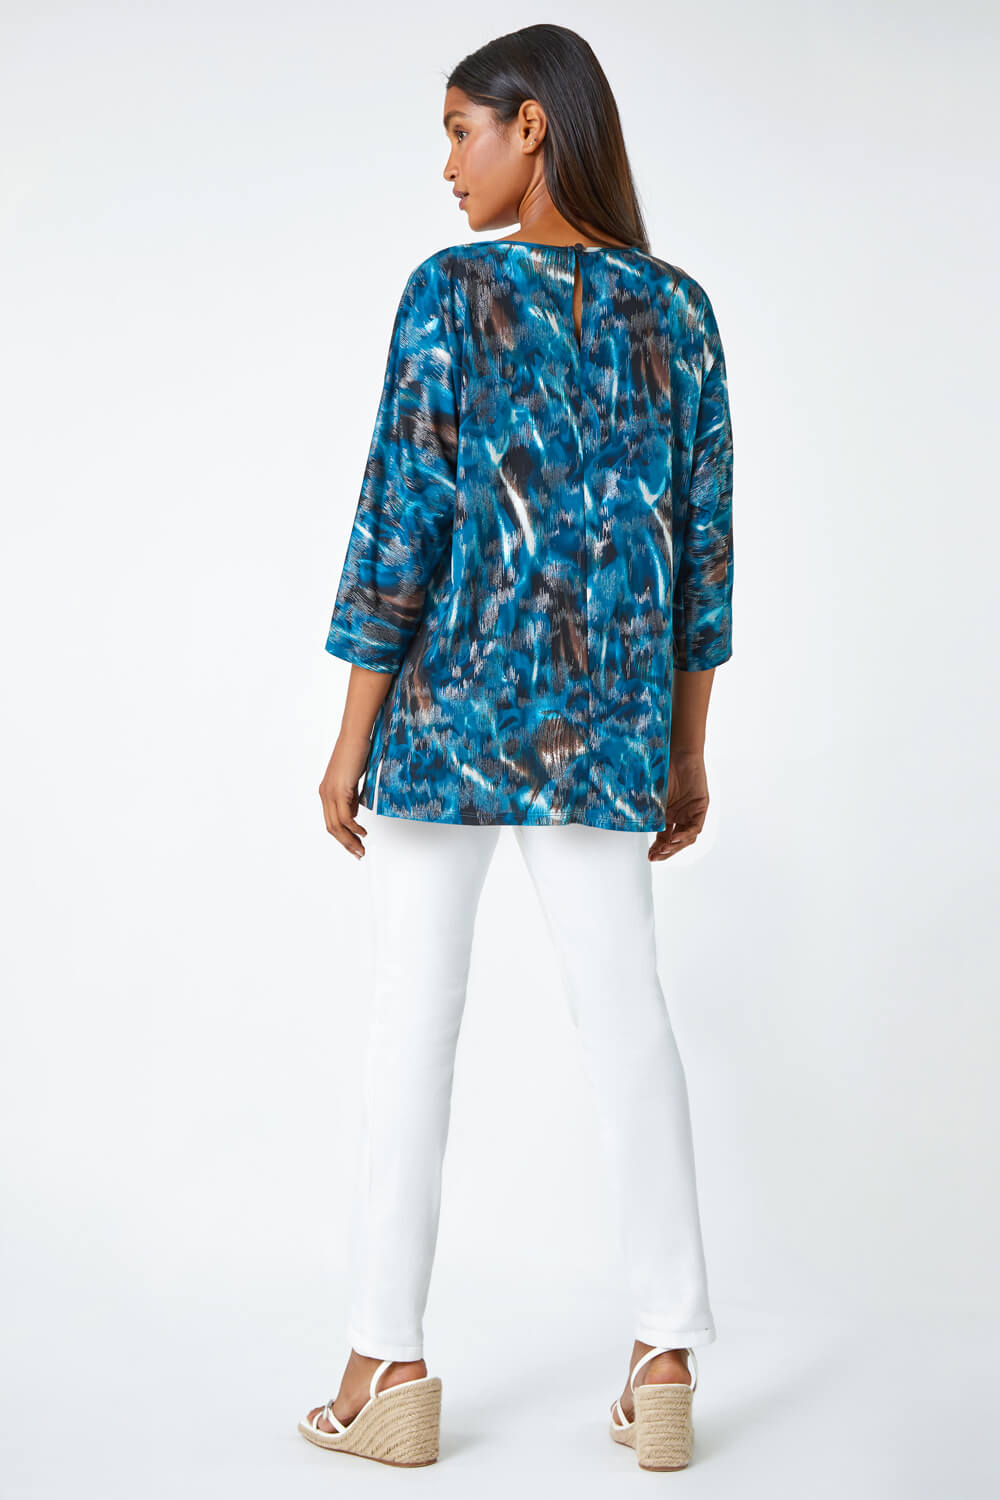 Blue Metallic Abstract Print Oversized T-Shirt, Image 3 of 5